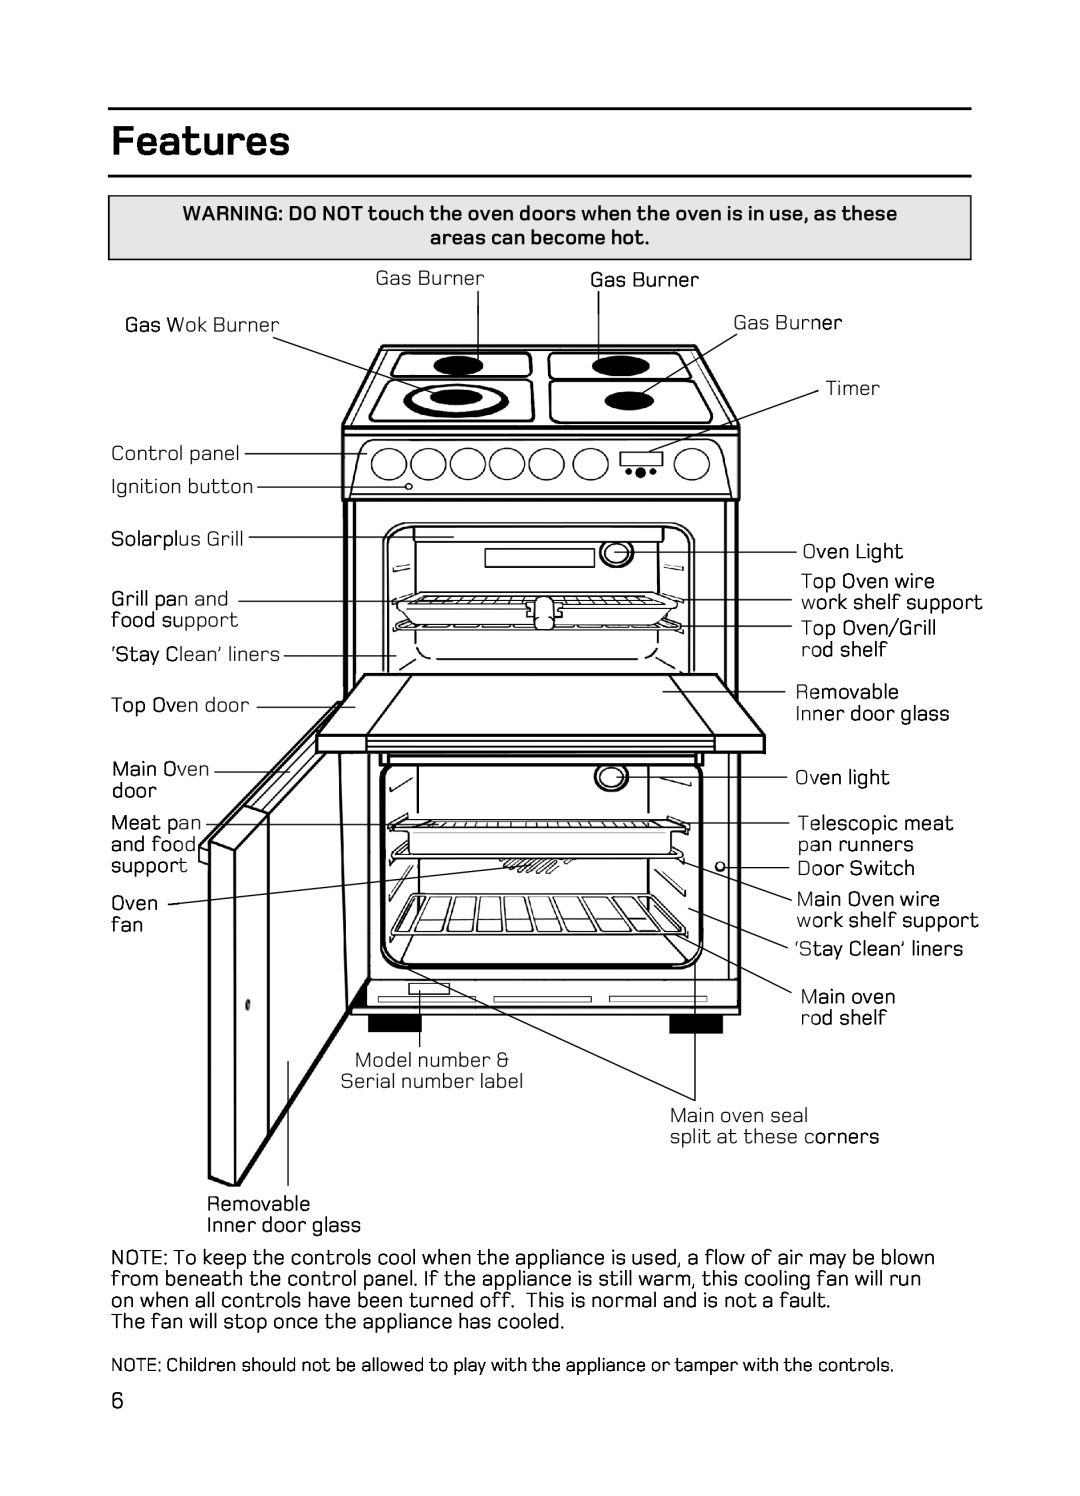 Hotpoint EG94 manual Features, WARNING DO NOT touch the oven doors when the oven is in use, as these, areas can become hot 